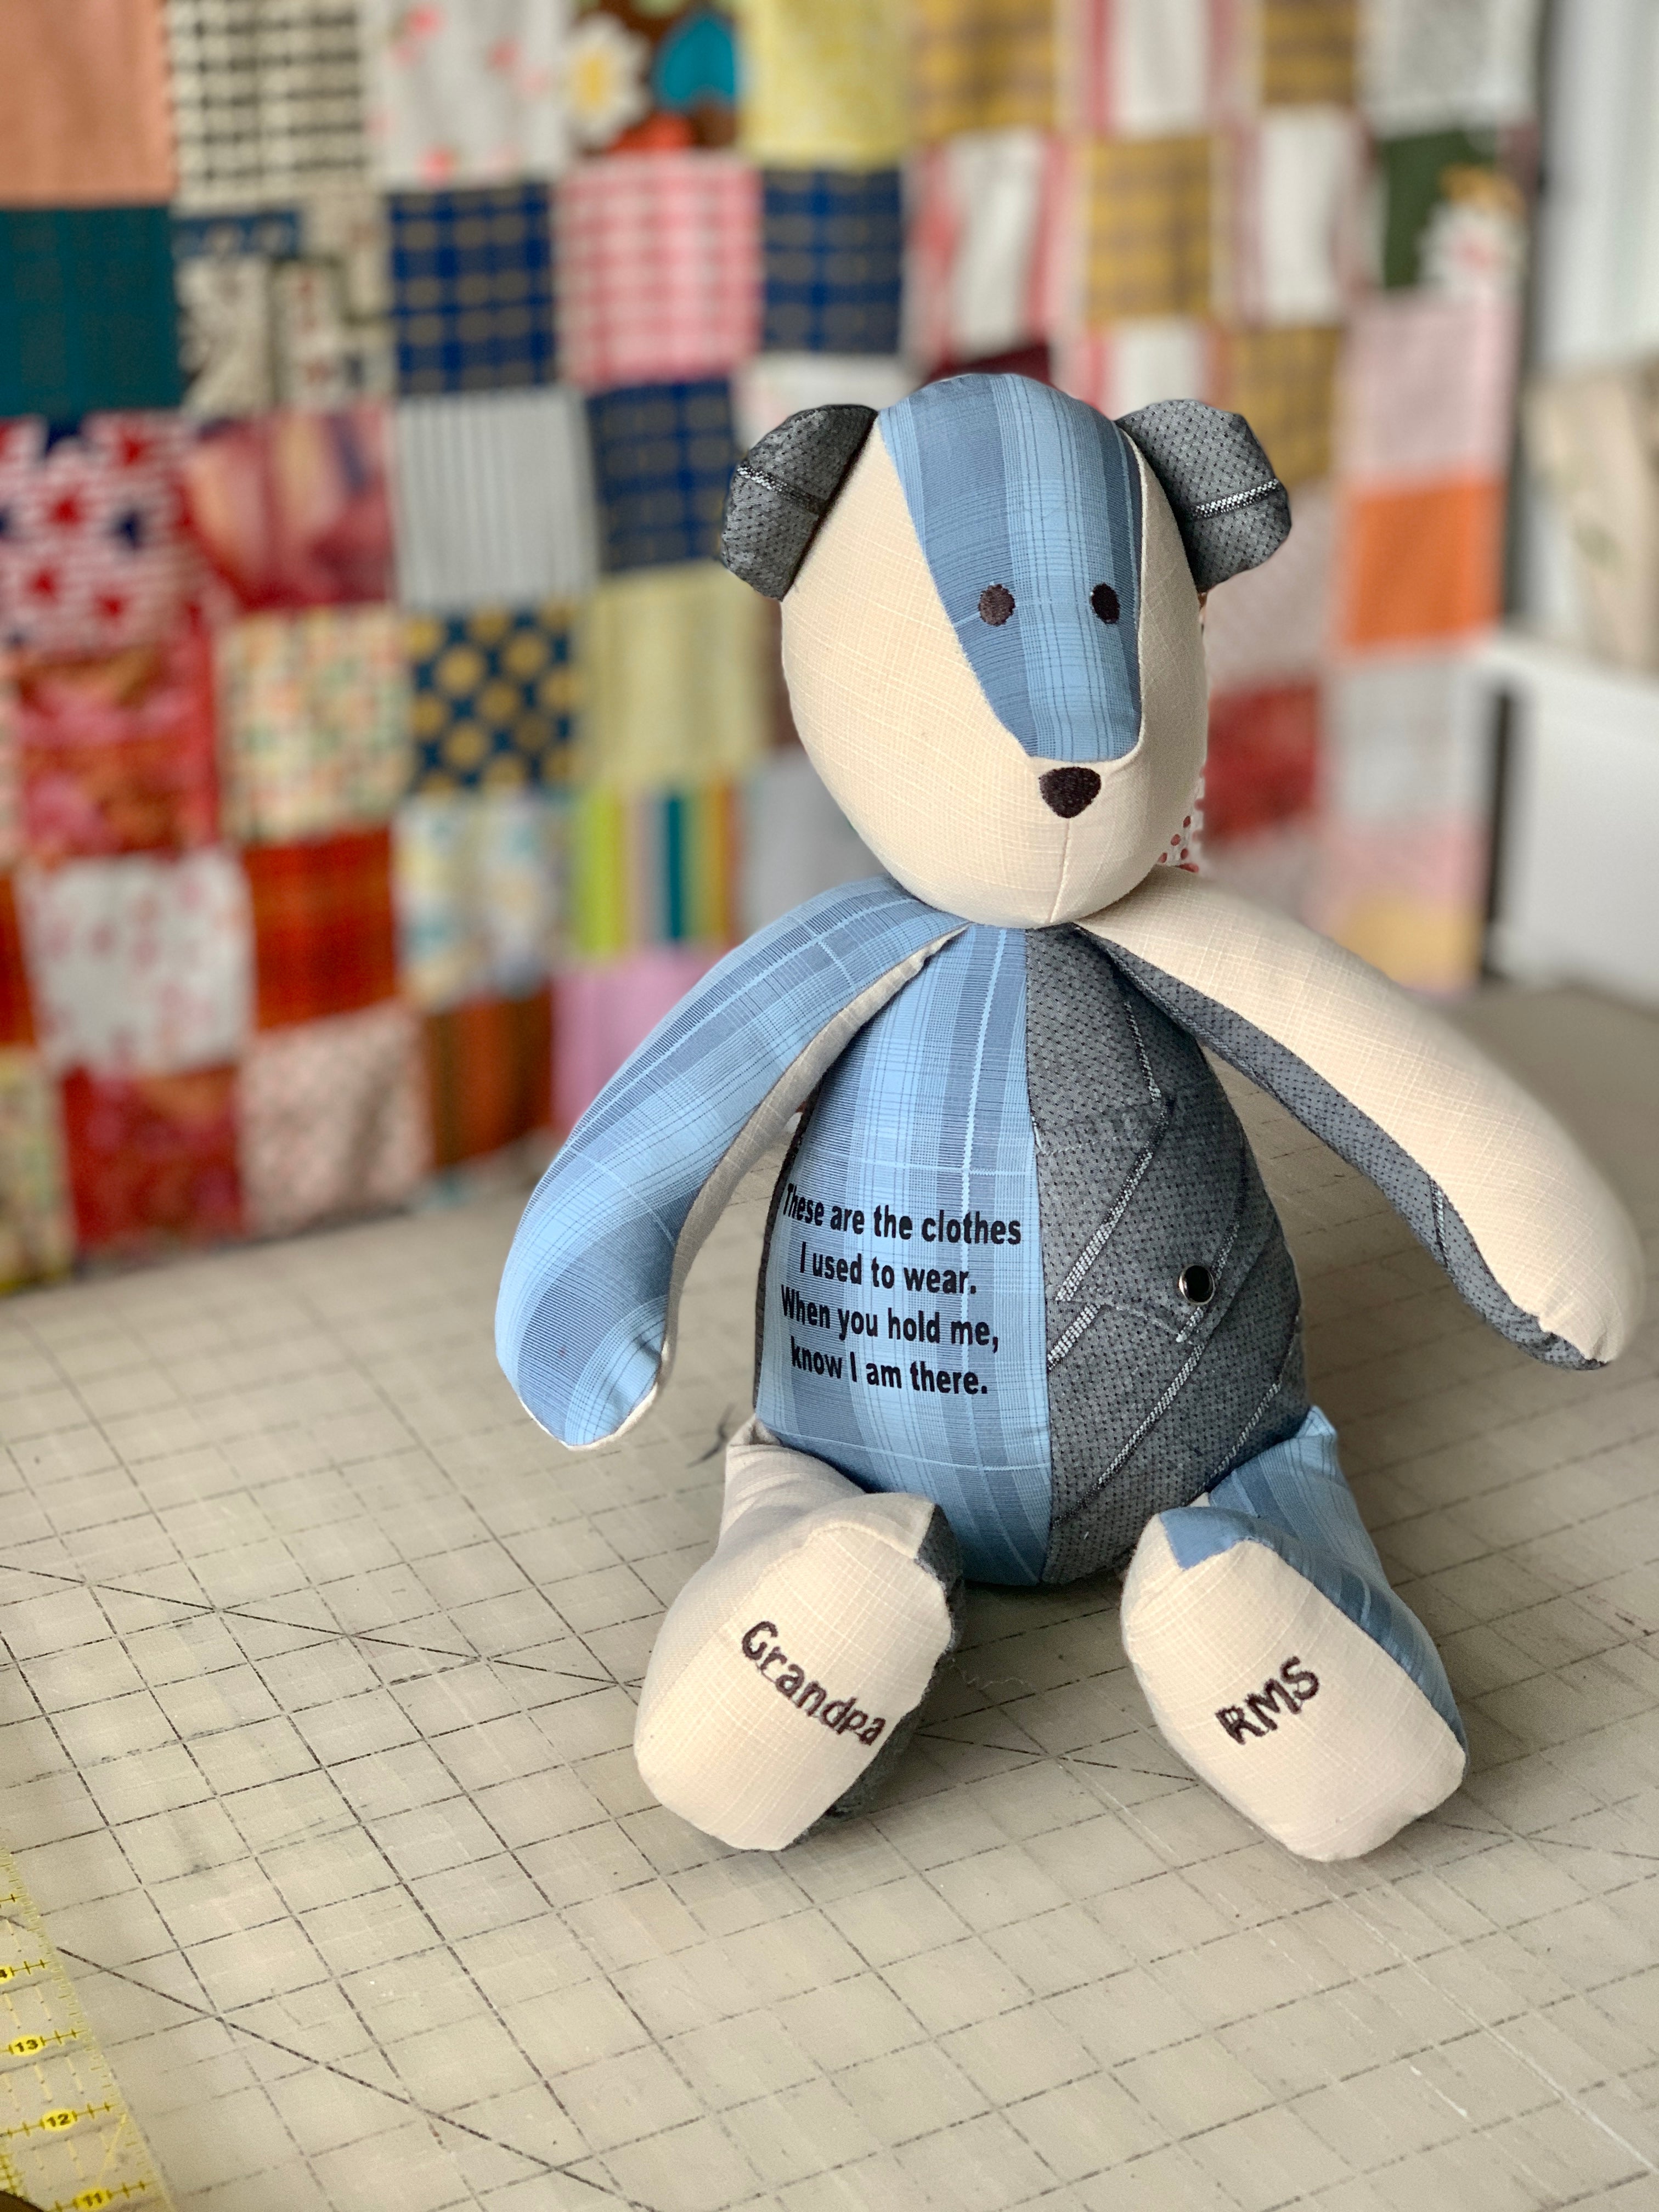 what can we make from your clothes? – The Patchwork Bear